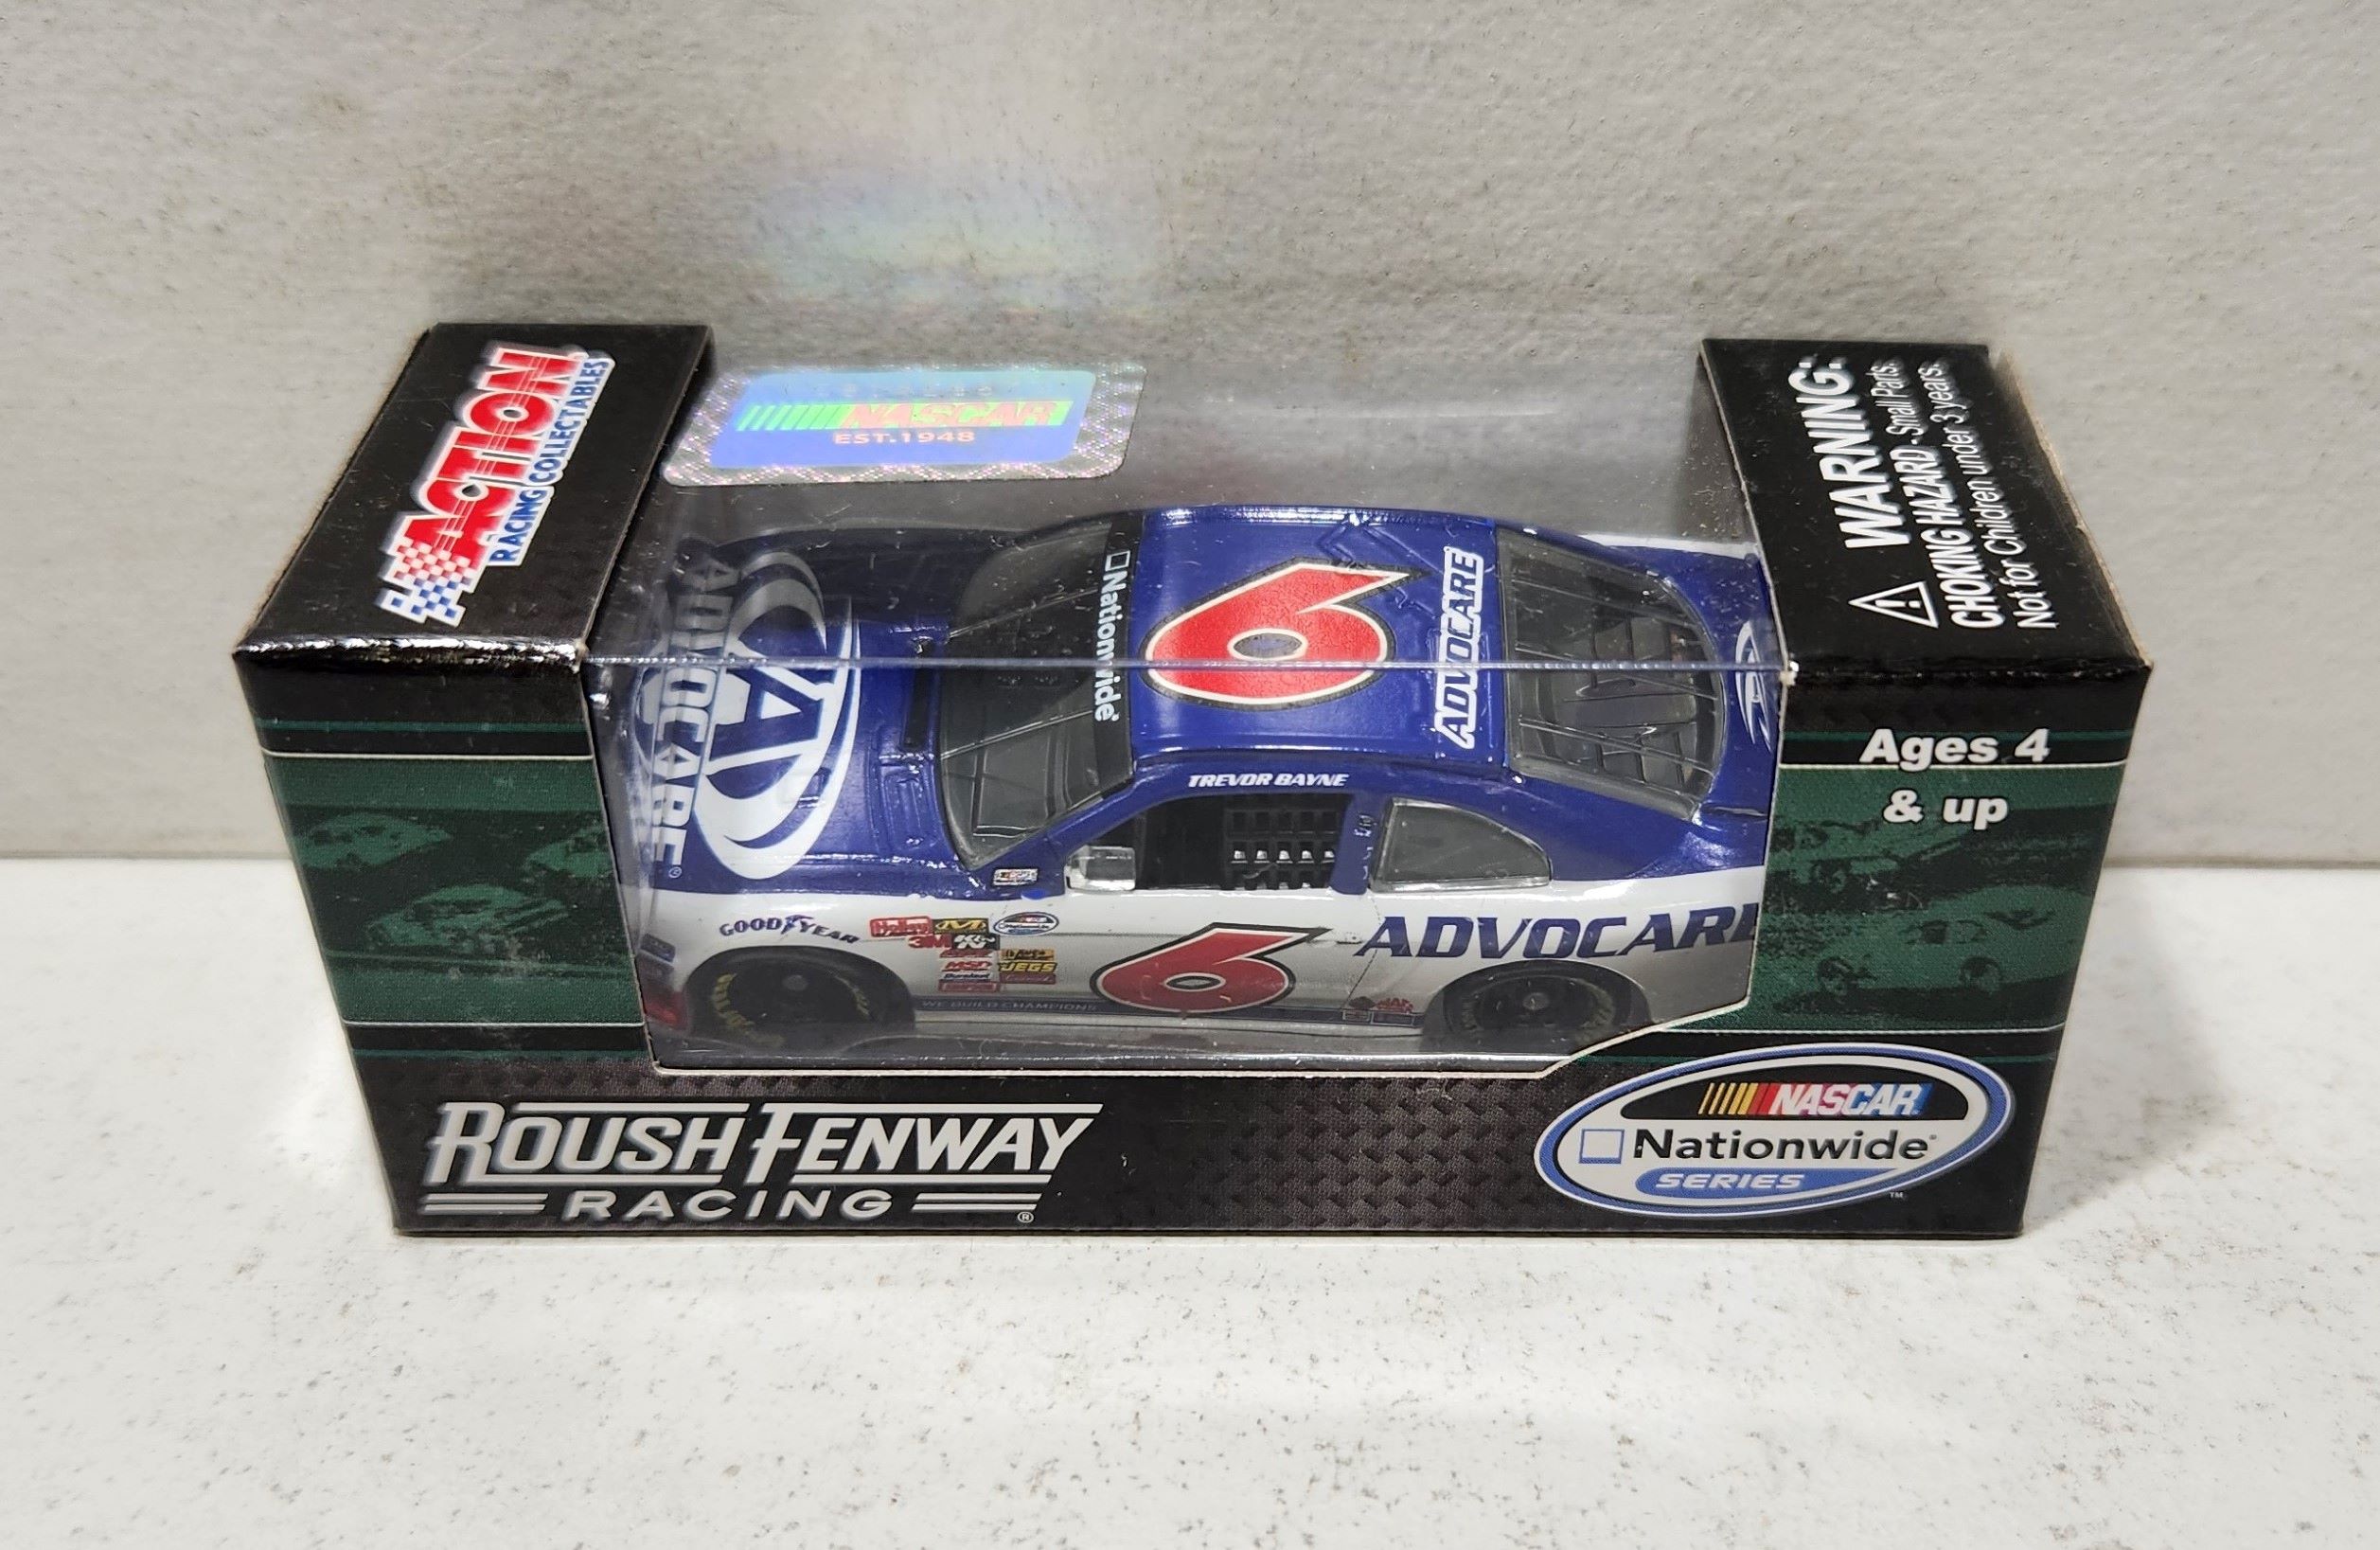 2014 Trevor Bayne 1/64th AvcoCare "Nationwide Series" Pitstop Series Mustang